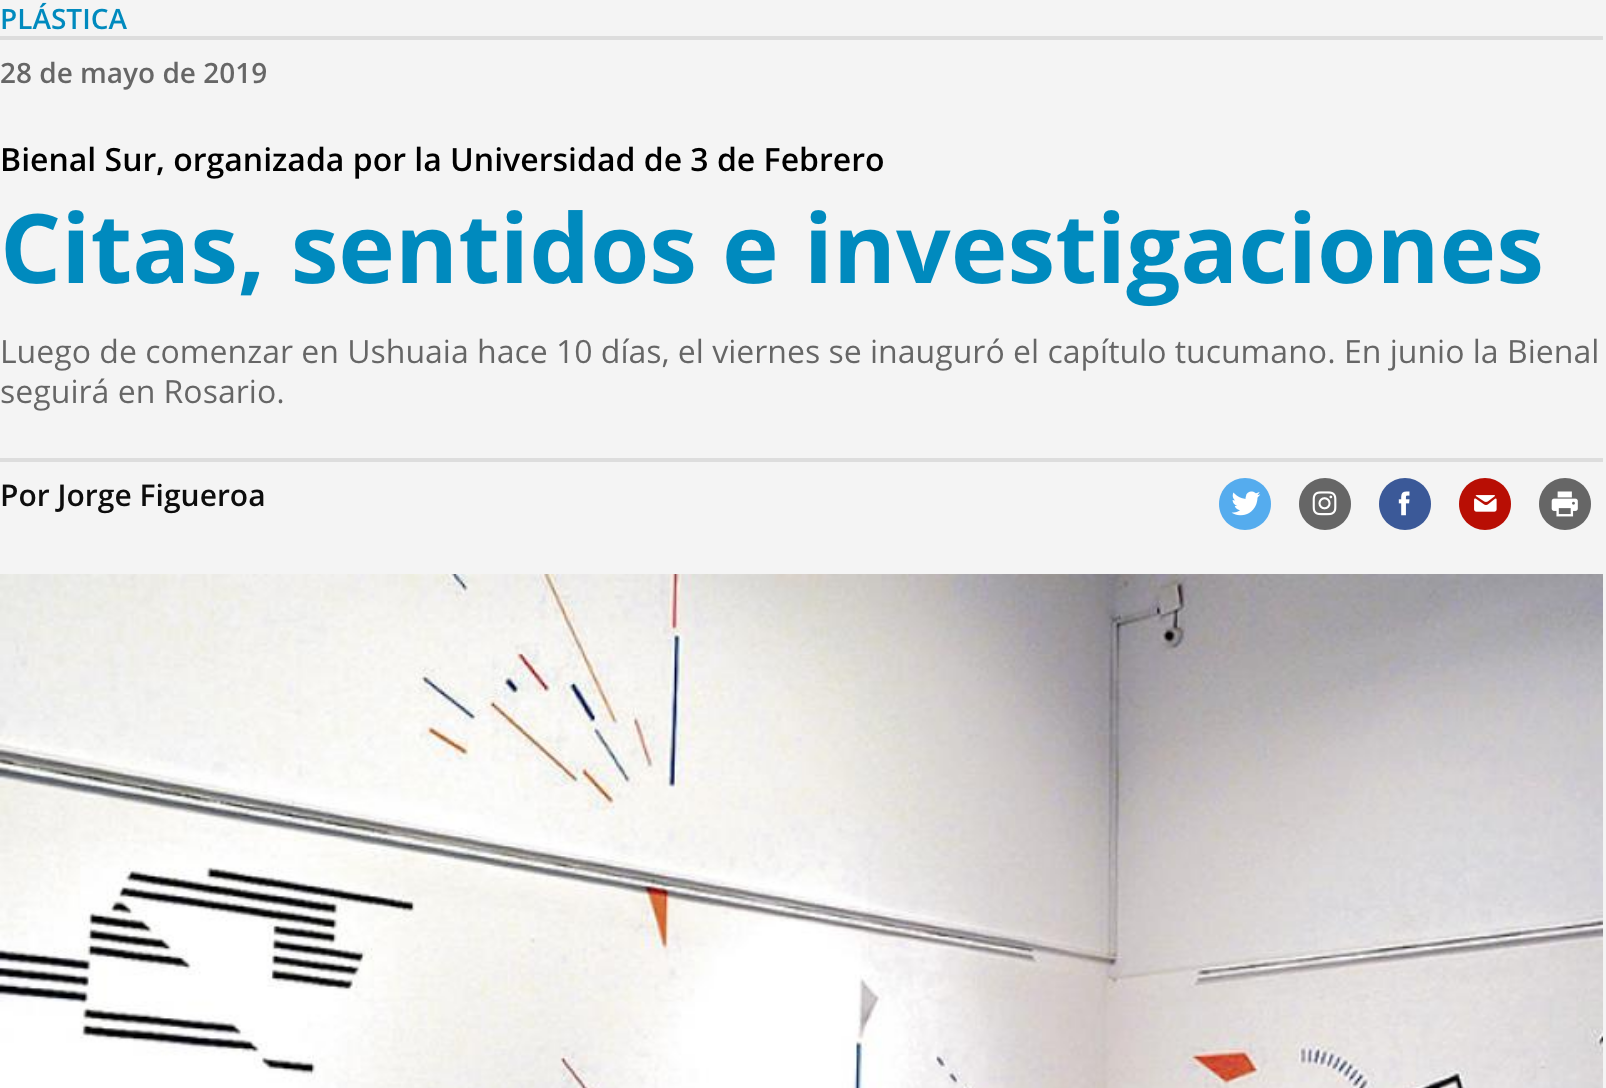 Newspaper Página 12 enterview about the exhibition “Entre Sentidos” (May 2019)